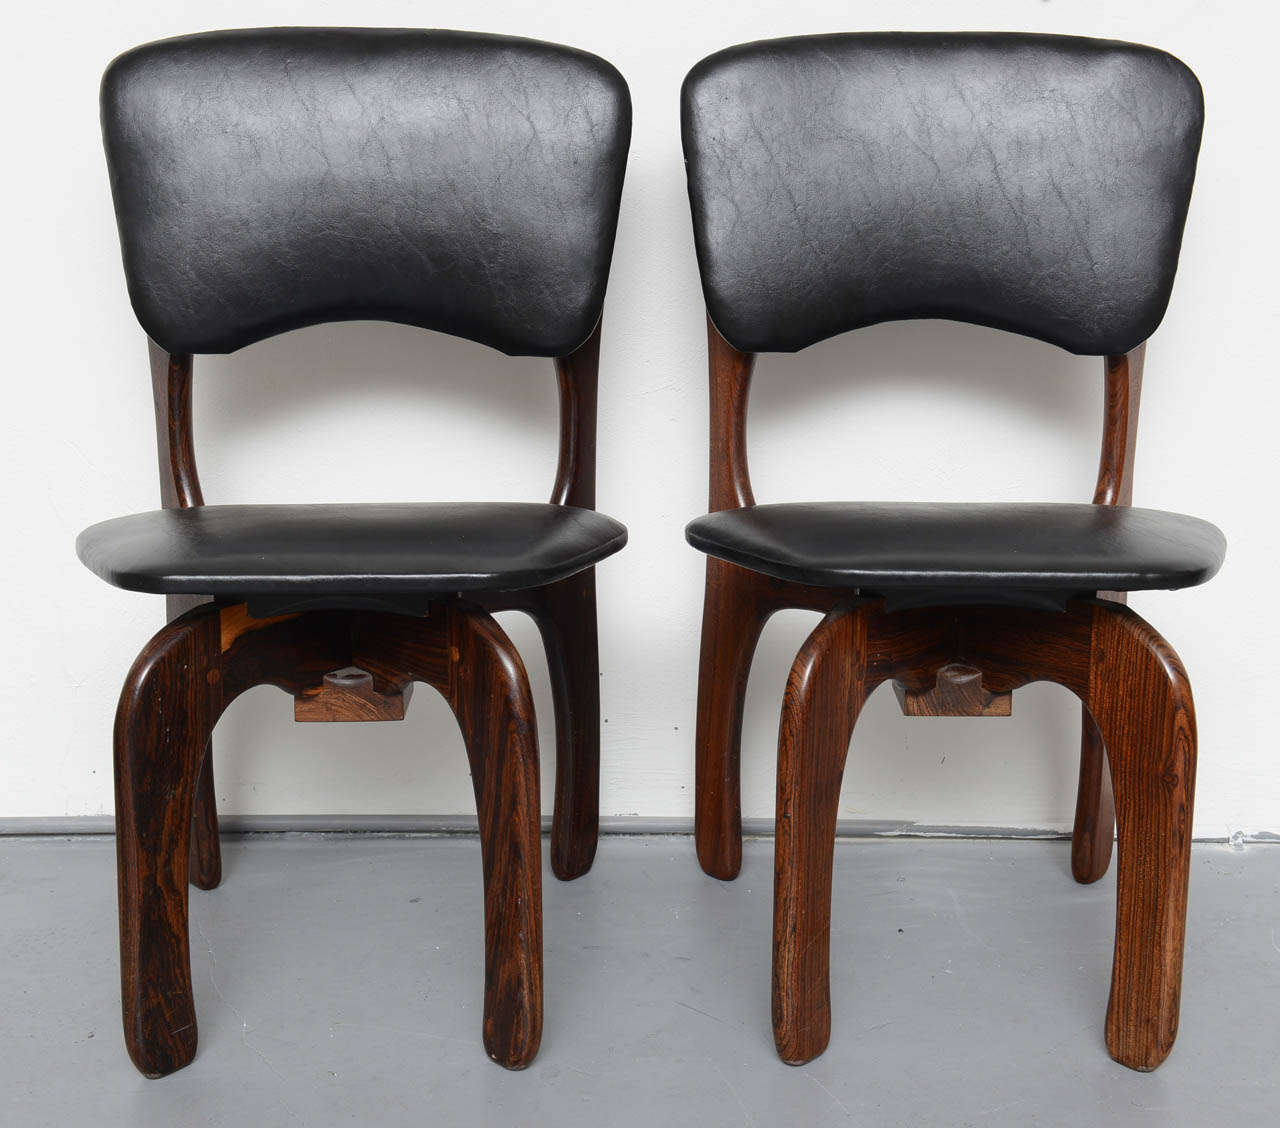 Beautiful set of original Don Shoemaker chairs from Mexican rosewood, 1971.